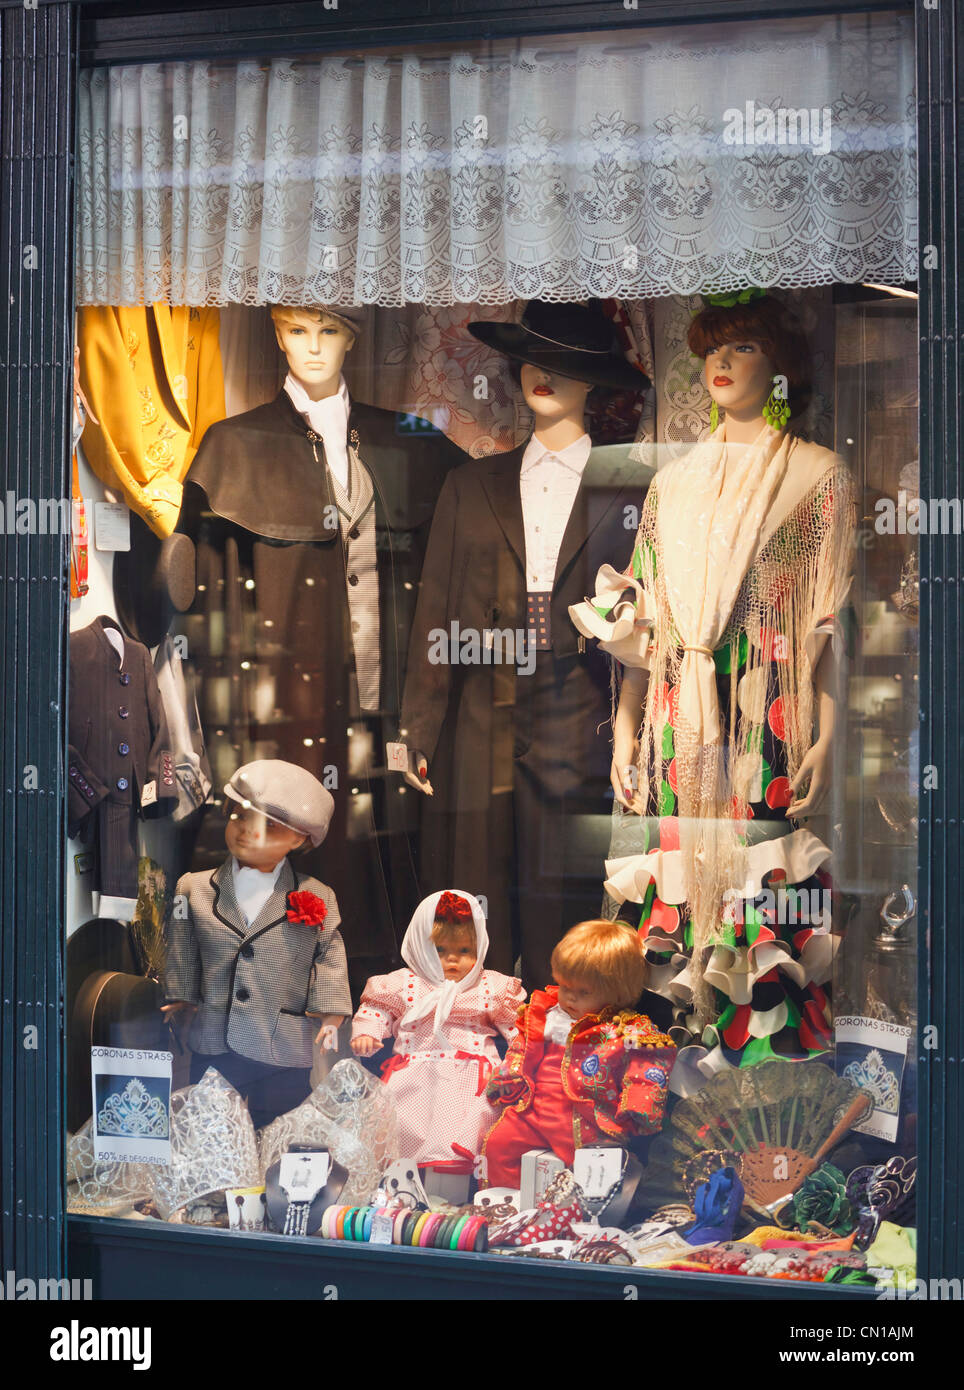 Madrid, Spain. Window of shop specializing in typical Spanish clothing and dolls. Stock Photo